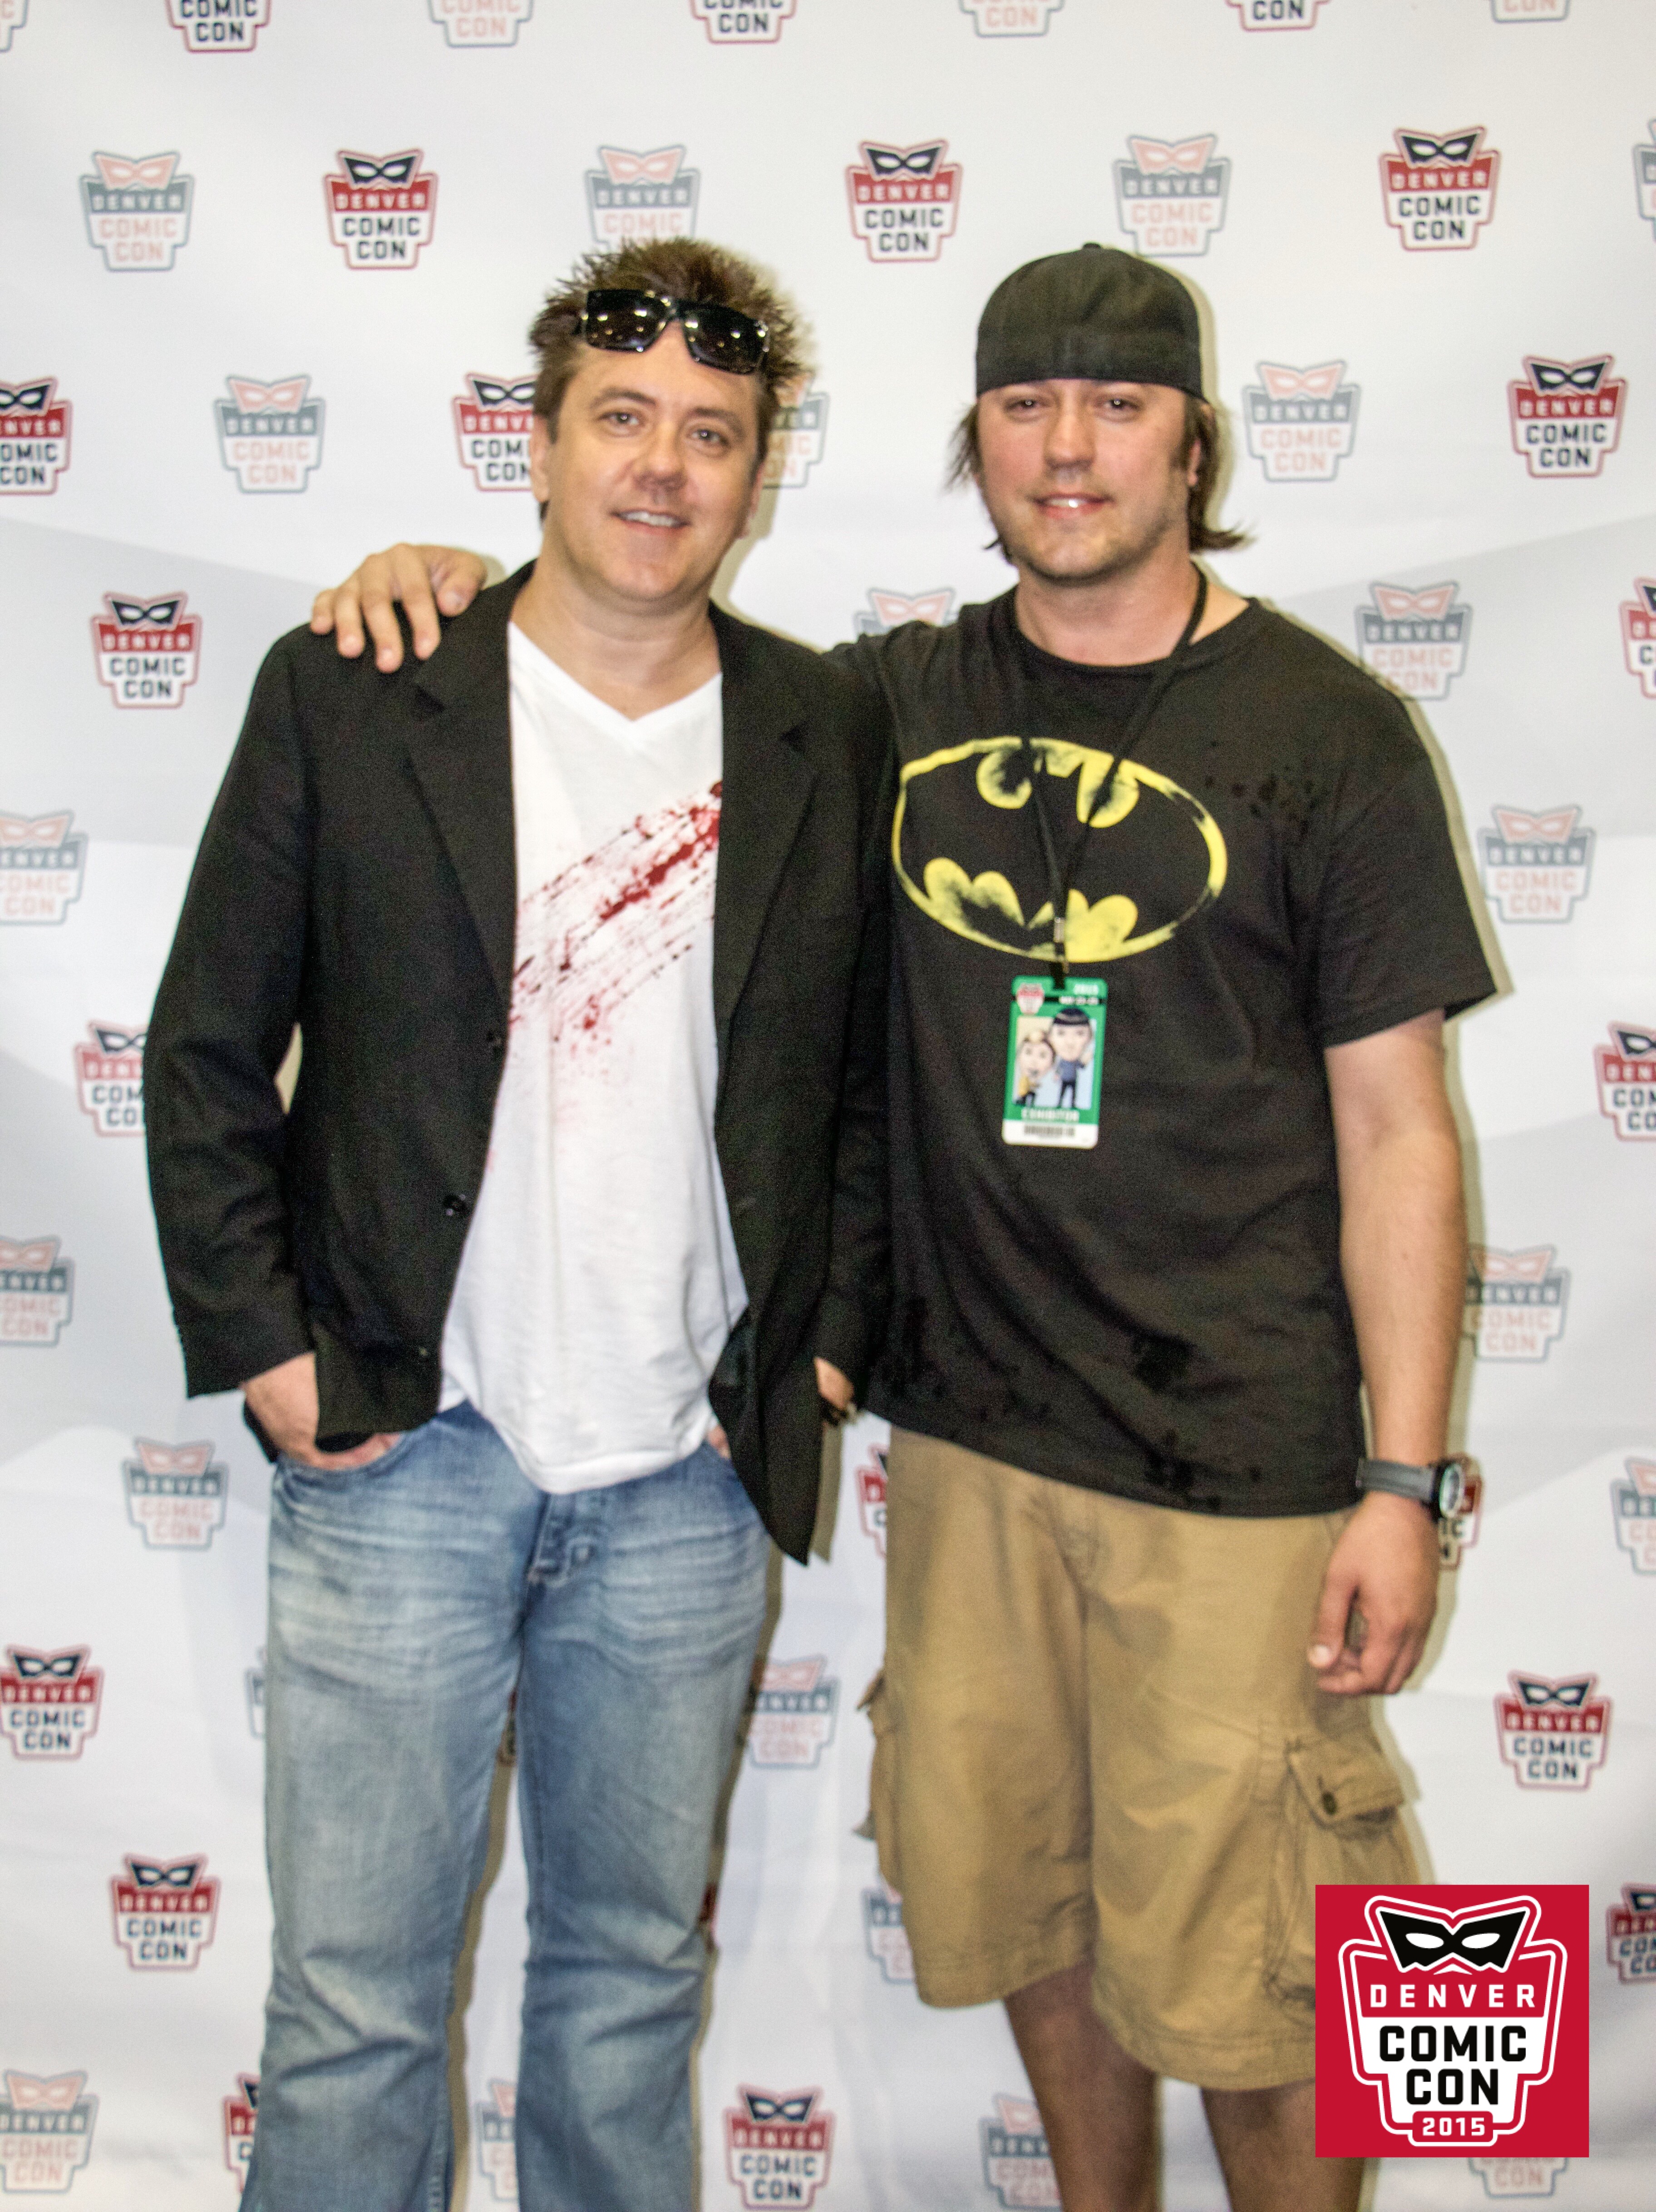 Director Brian McCulley and actor Jimmy Drain at Denver Comic Com